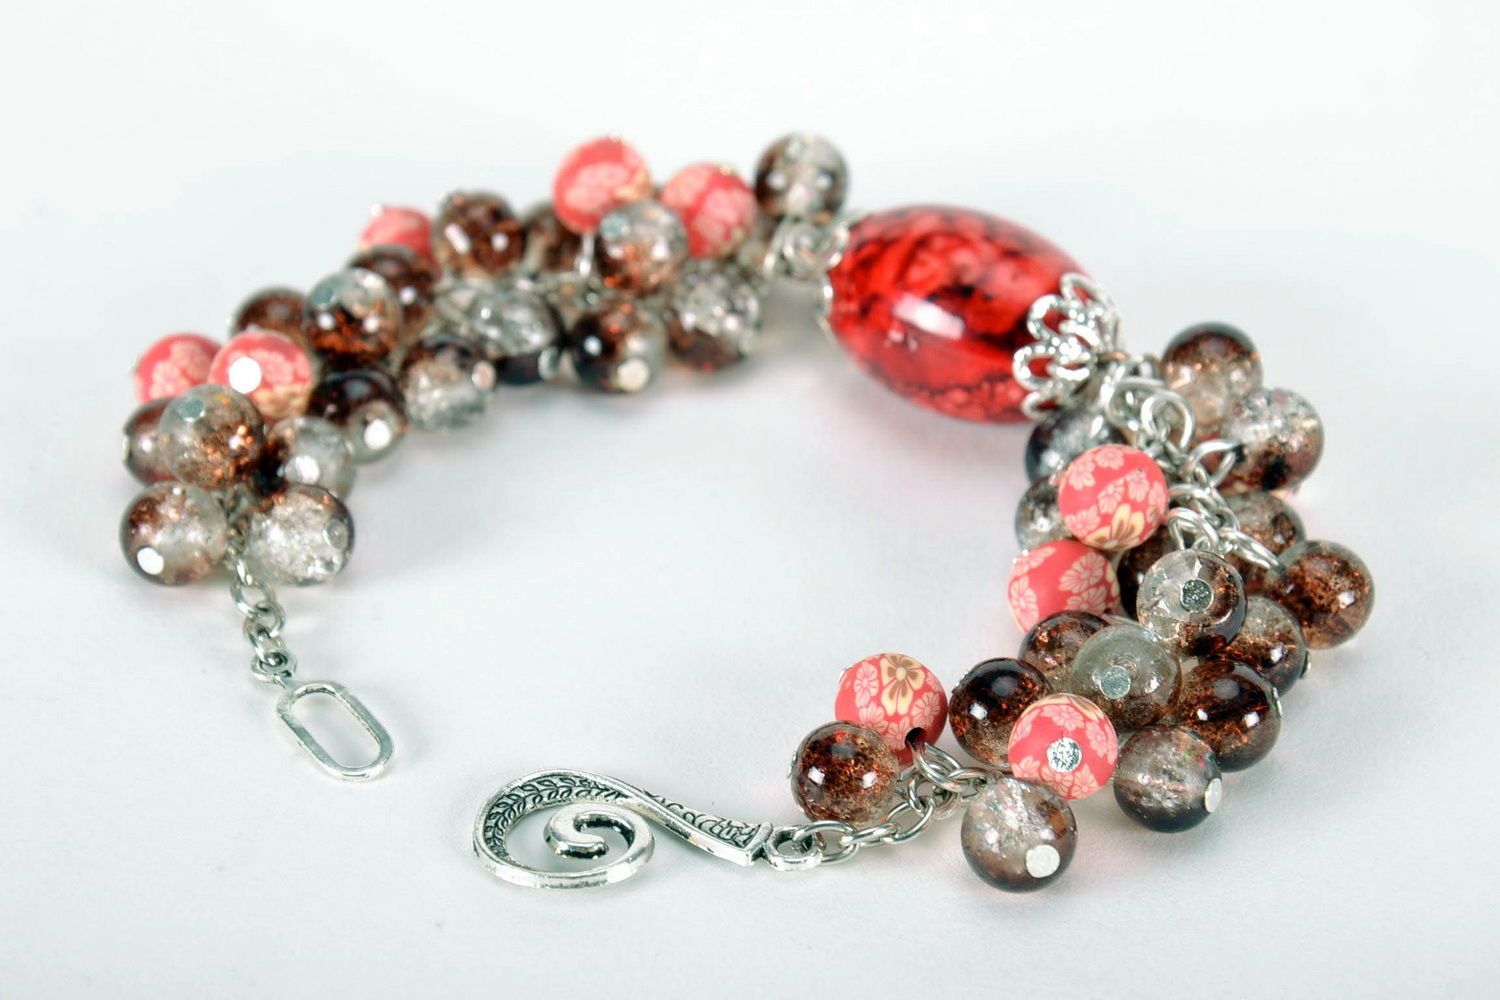 Bracelet made from glass beads and artificial stone photo 4